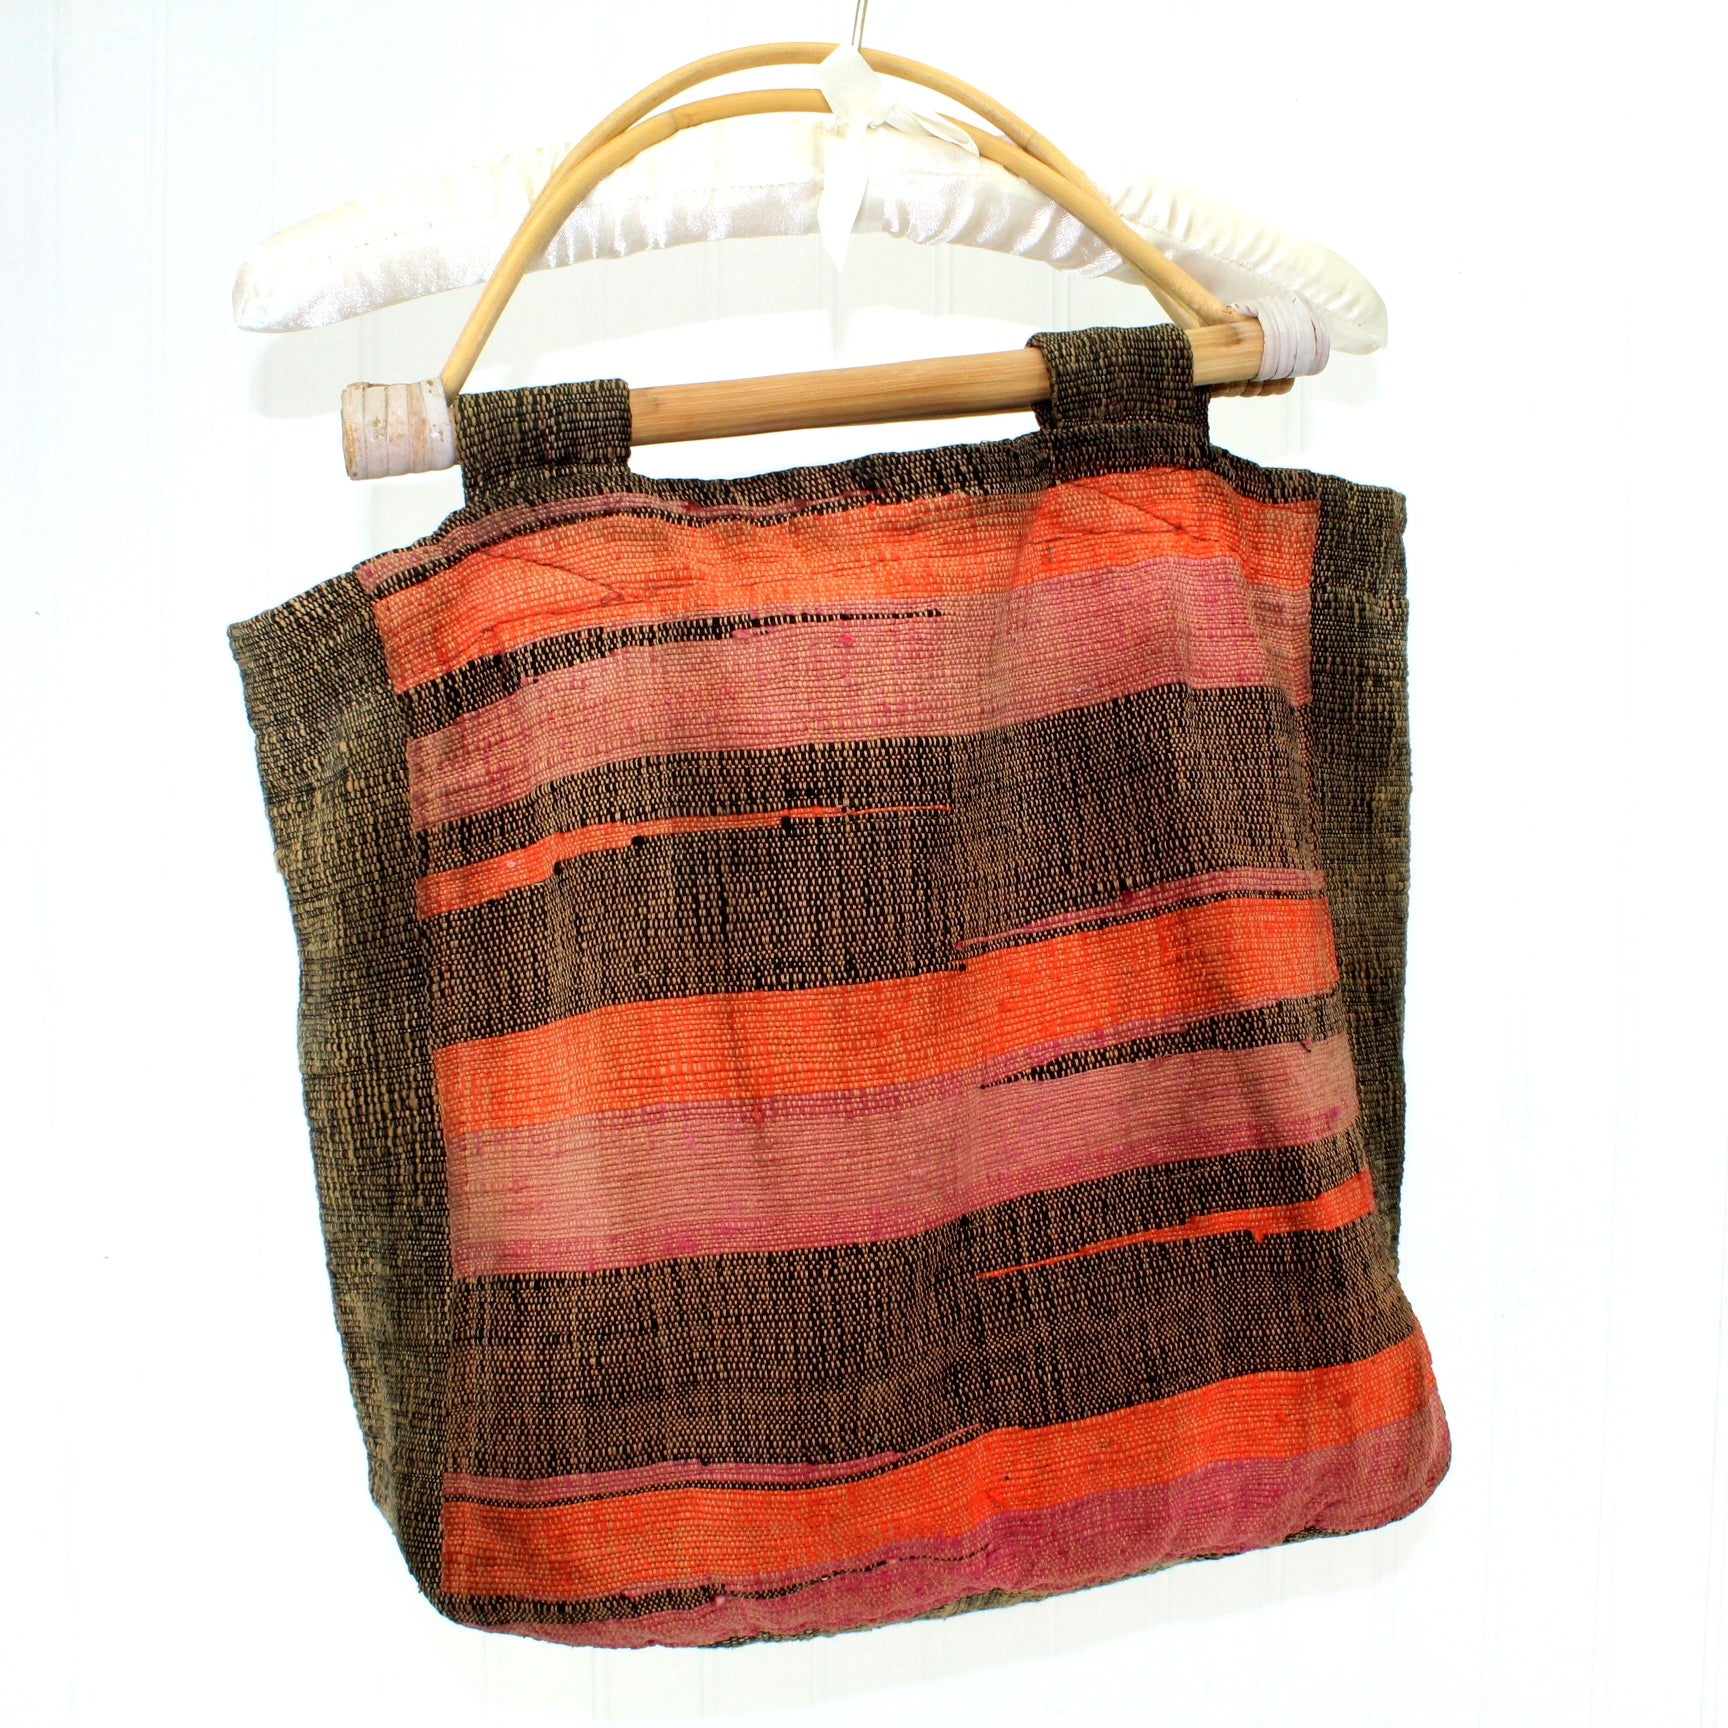 Hand Made Old Tote Granny Bag Craft Travel Bag Heavy Woven Fiber Muslin Lining Bamboo Handles Vintage used